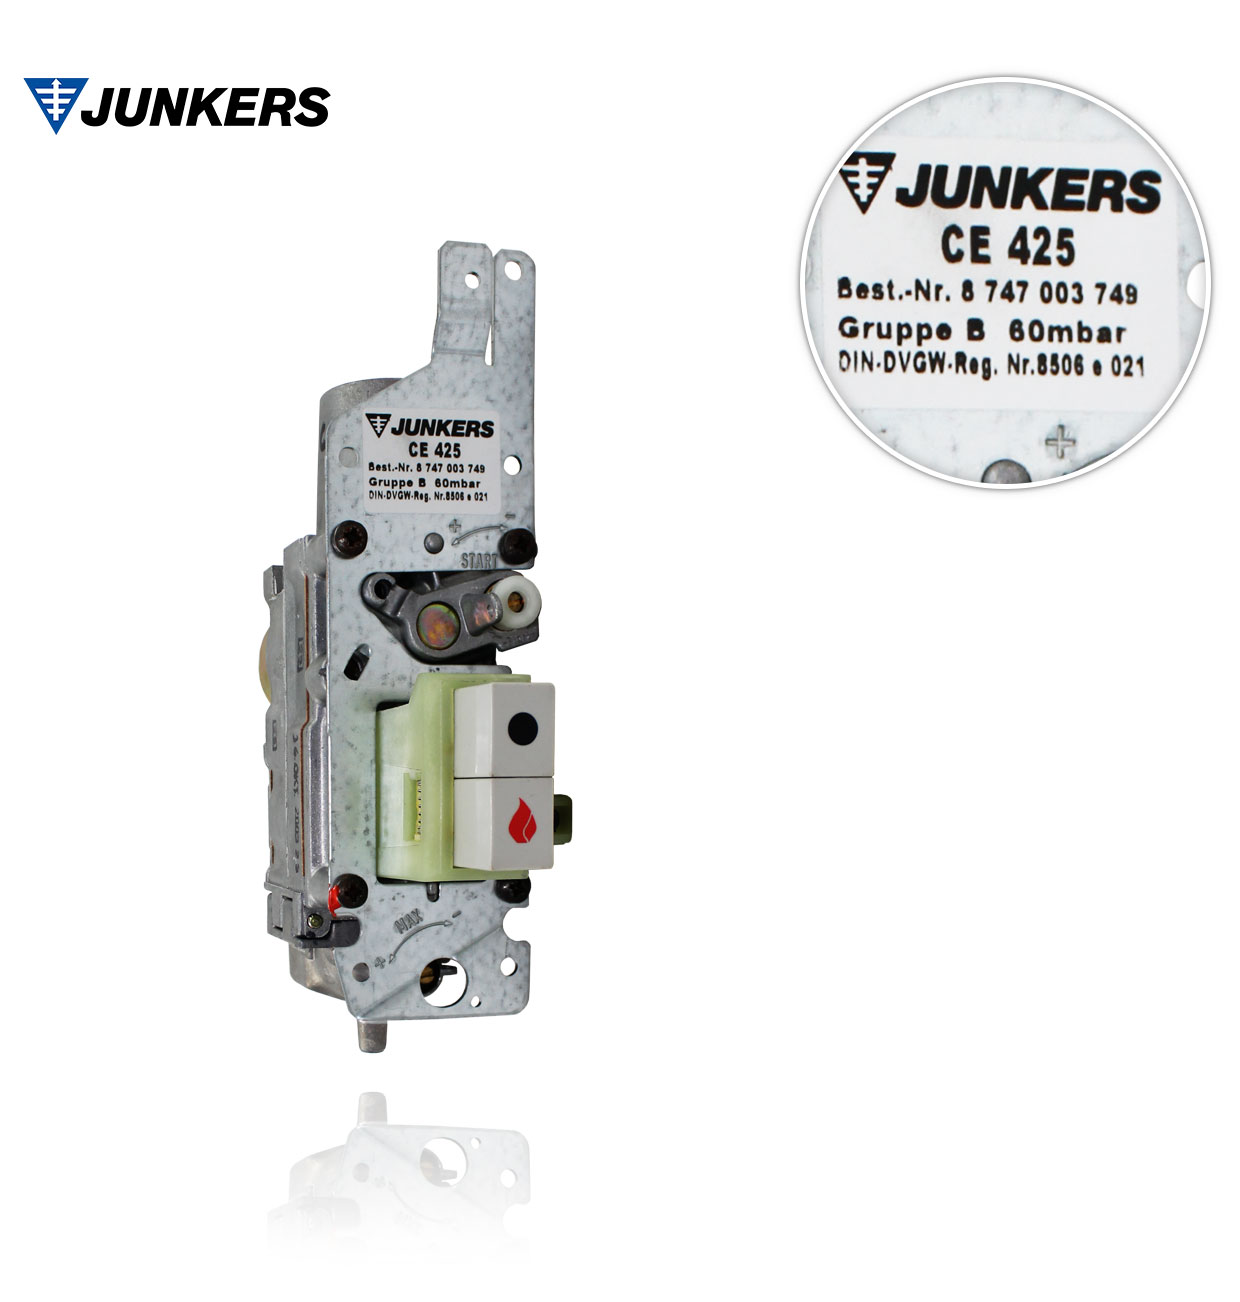 JUNKERS 8717001325 GAS VALVE BODY